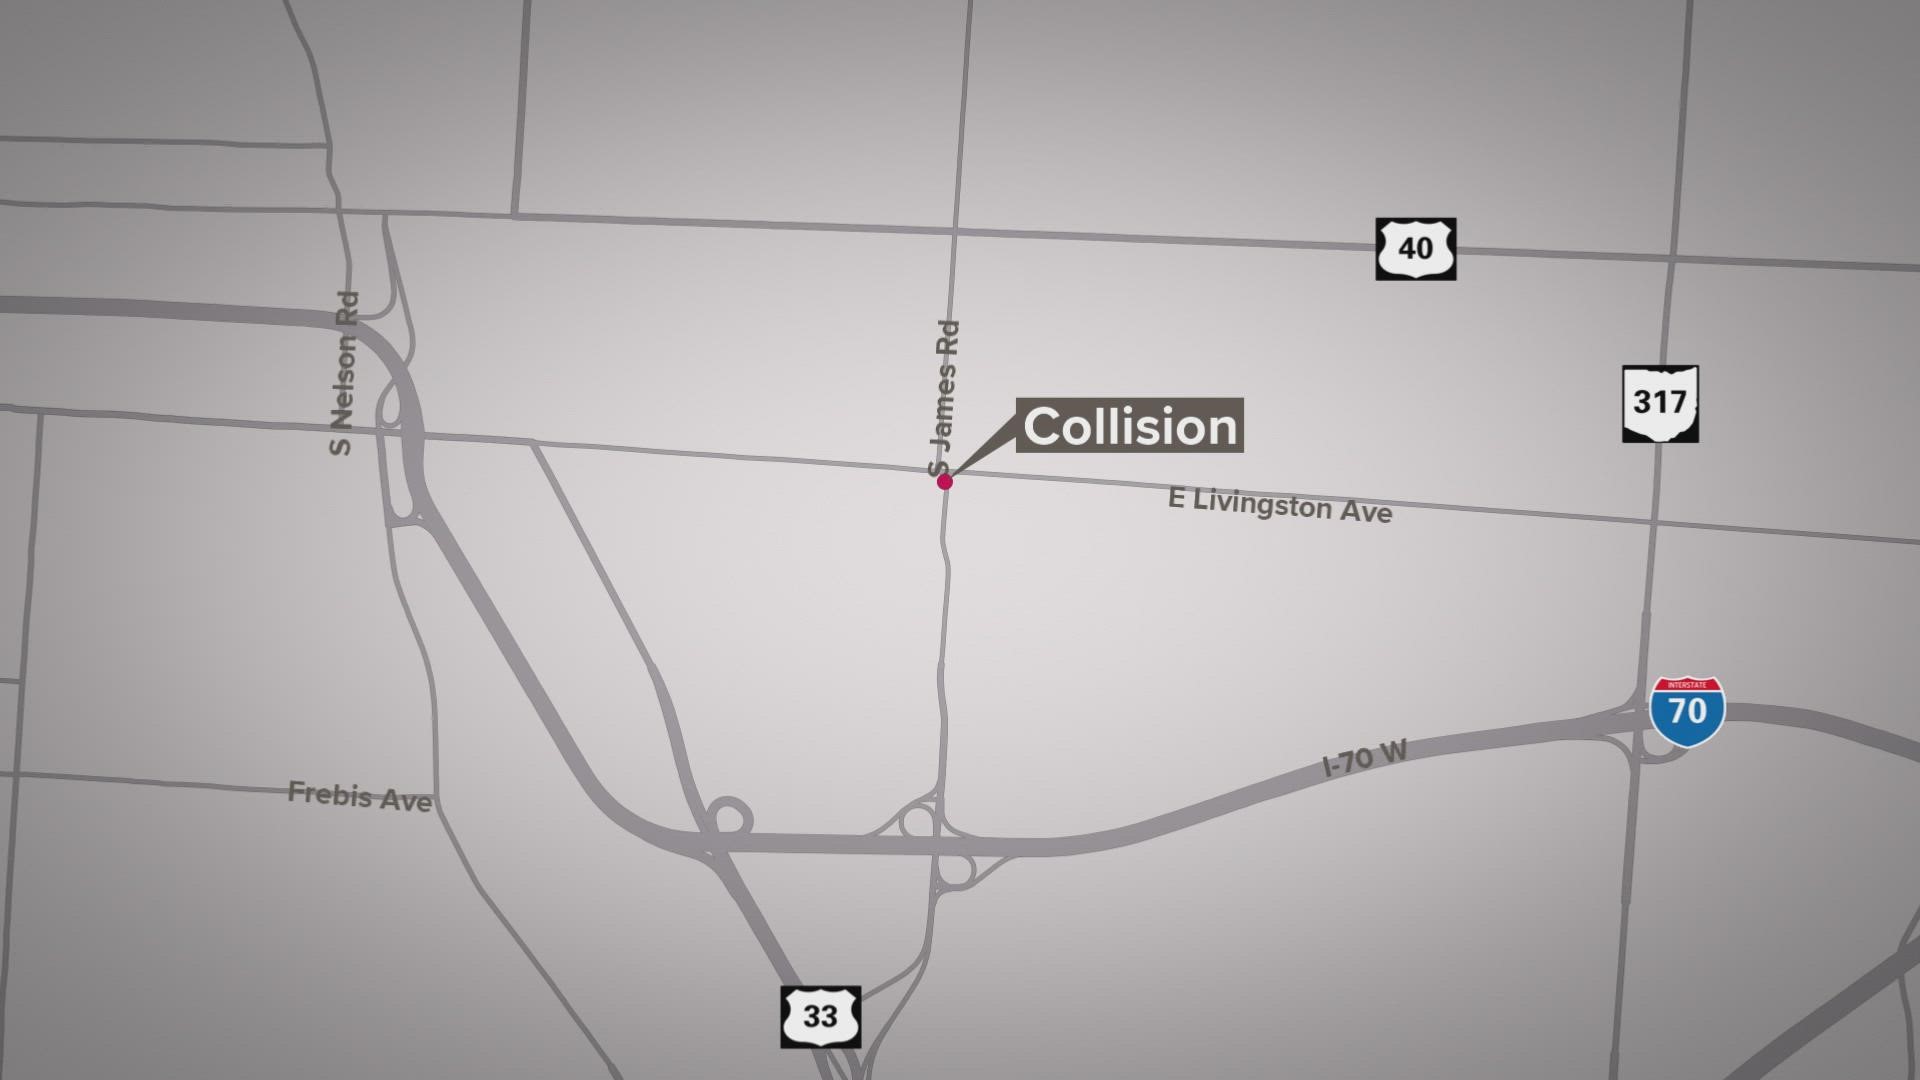 The crash happened around 4:35 a.m. at the intersection of E. Livingston Avenue and S. James Road, according to police.